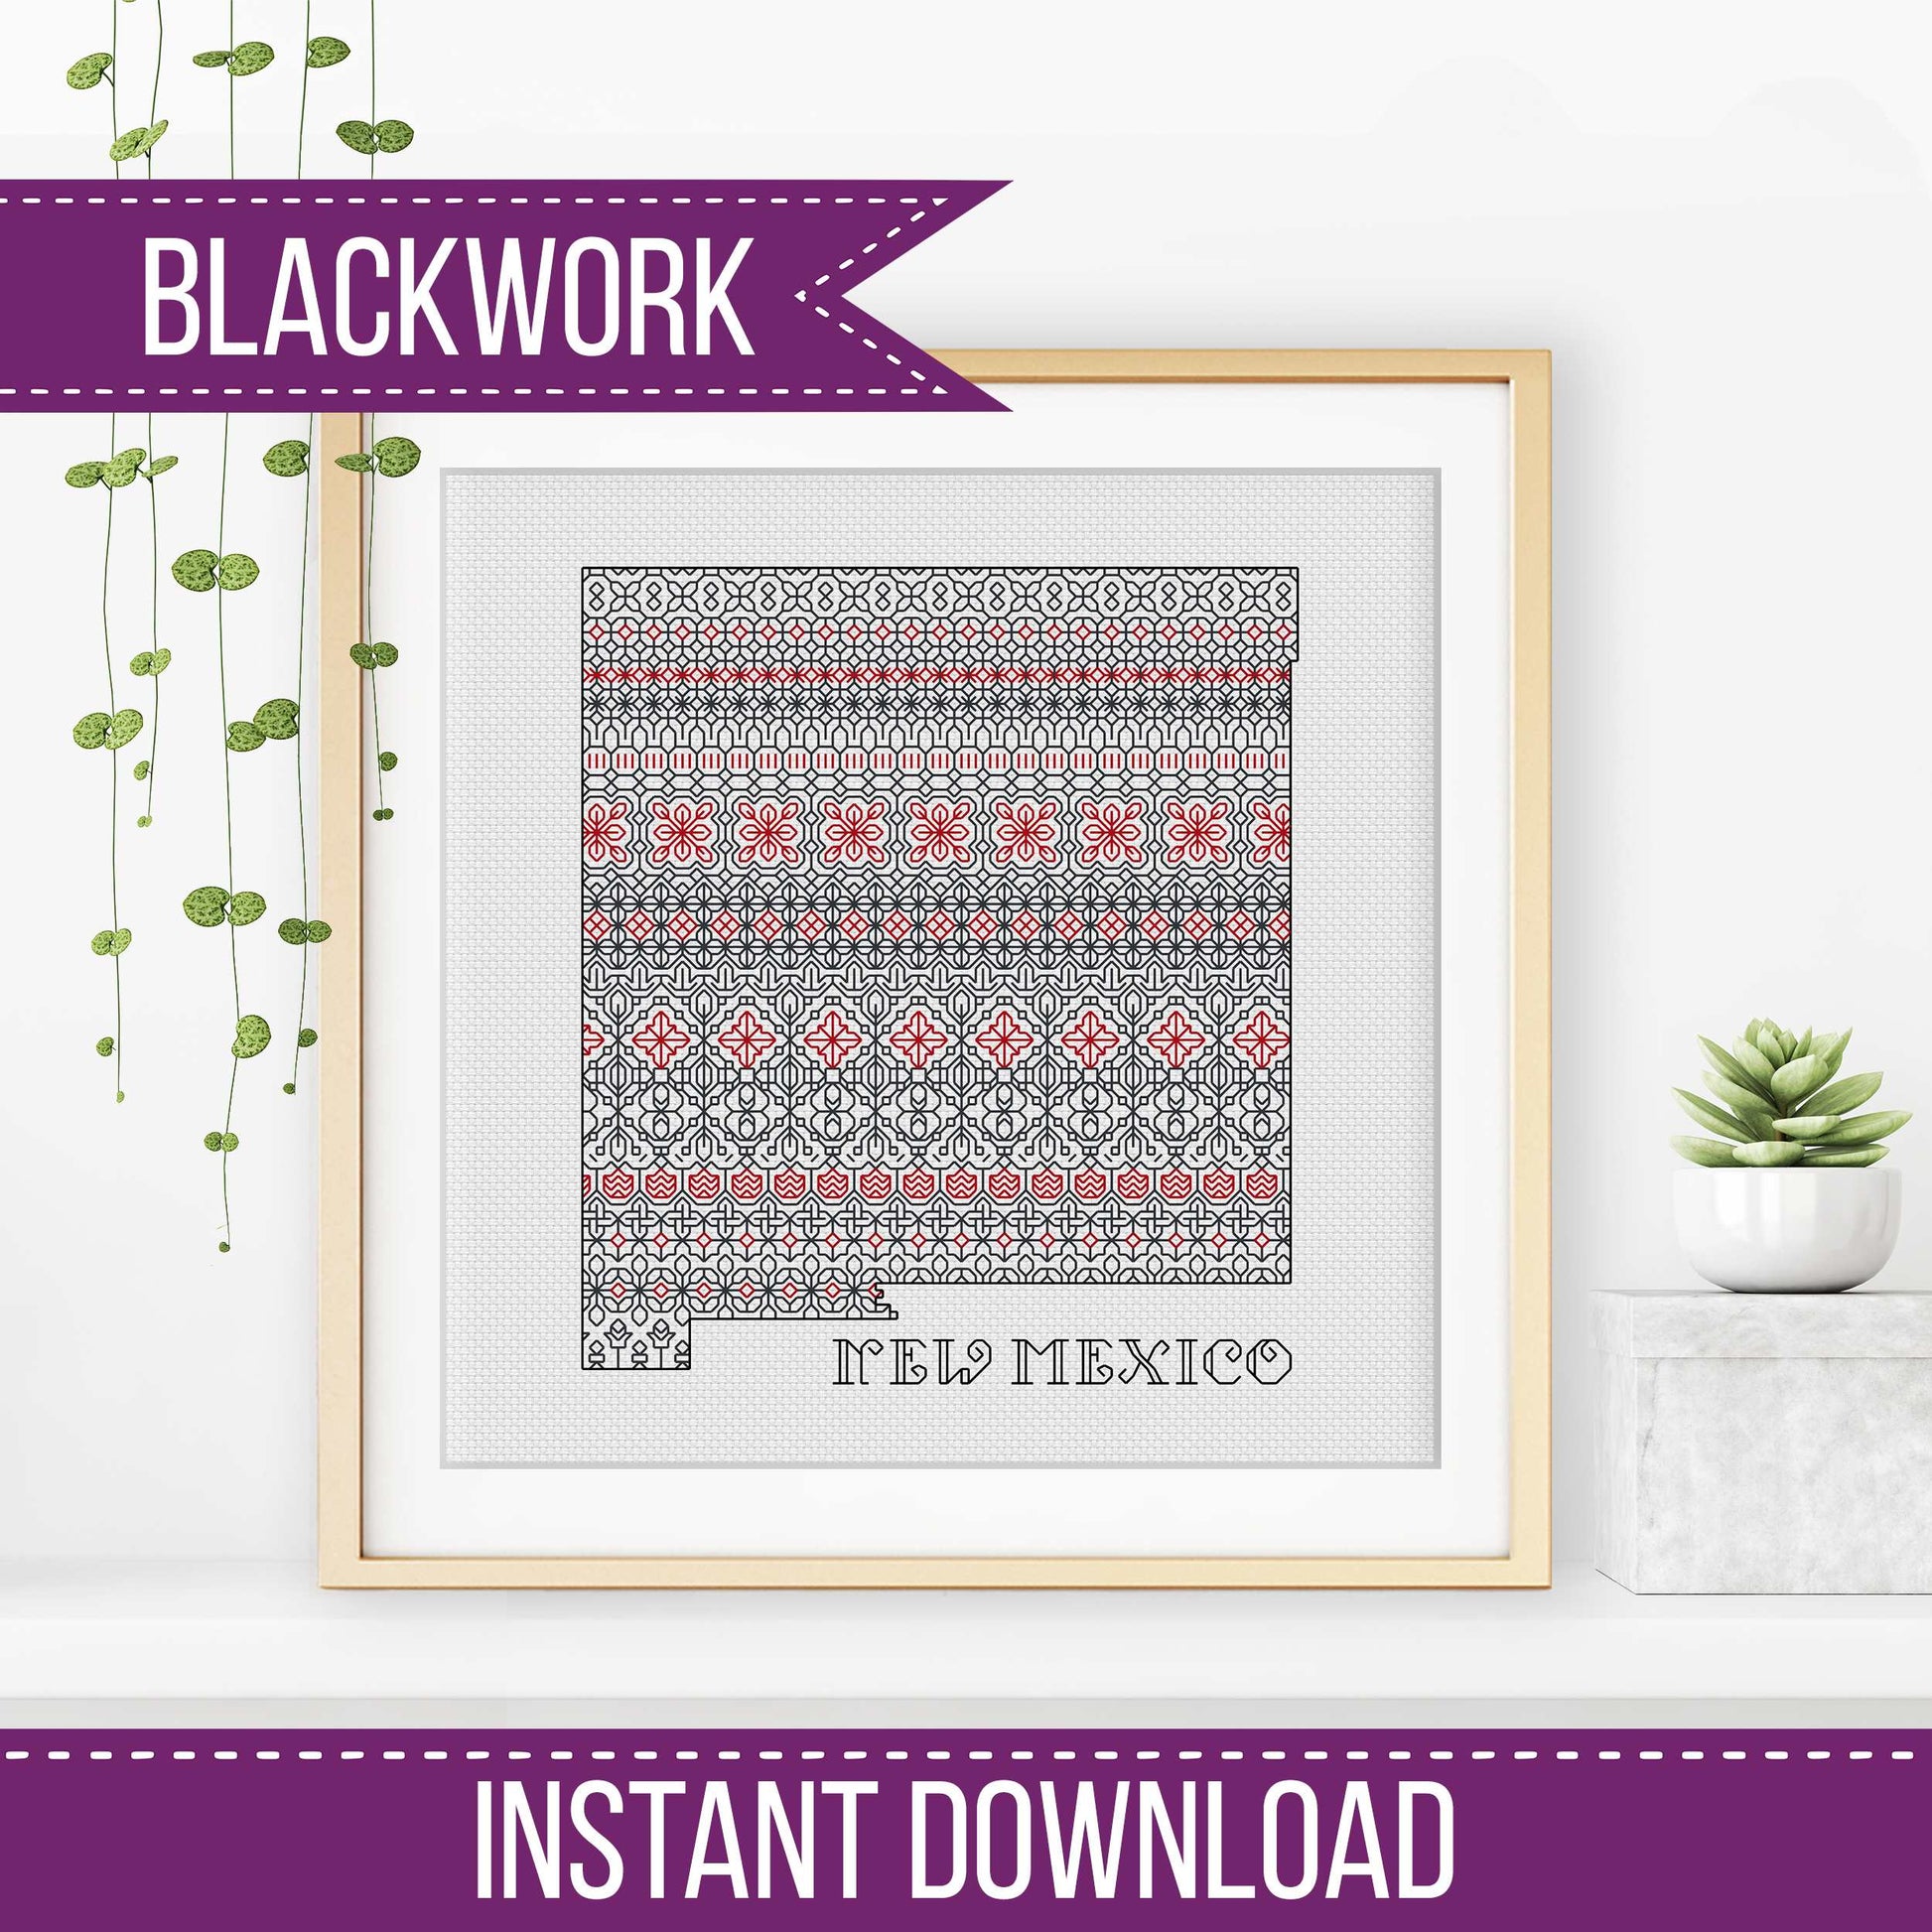 New Mexico - Red & Black - Blackwork Patterns & Cross Stitch by Peppermint Purple